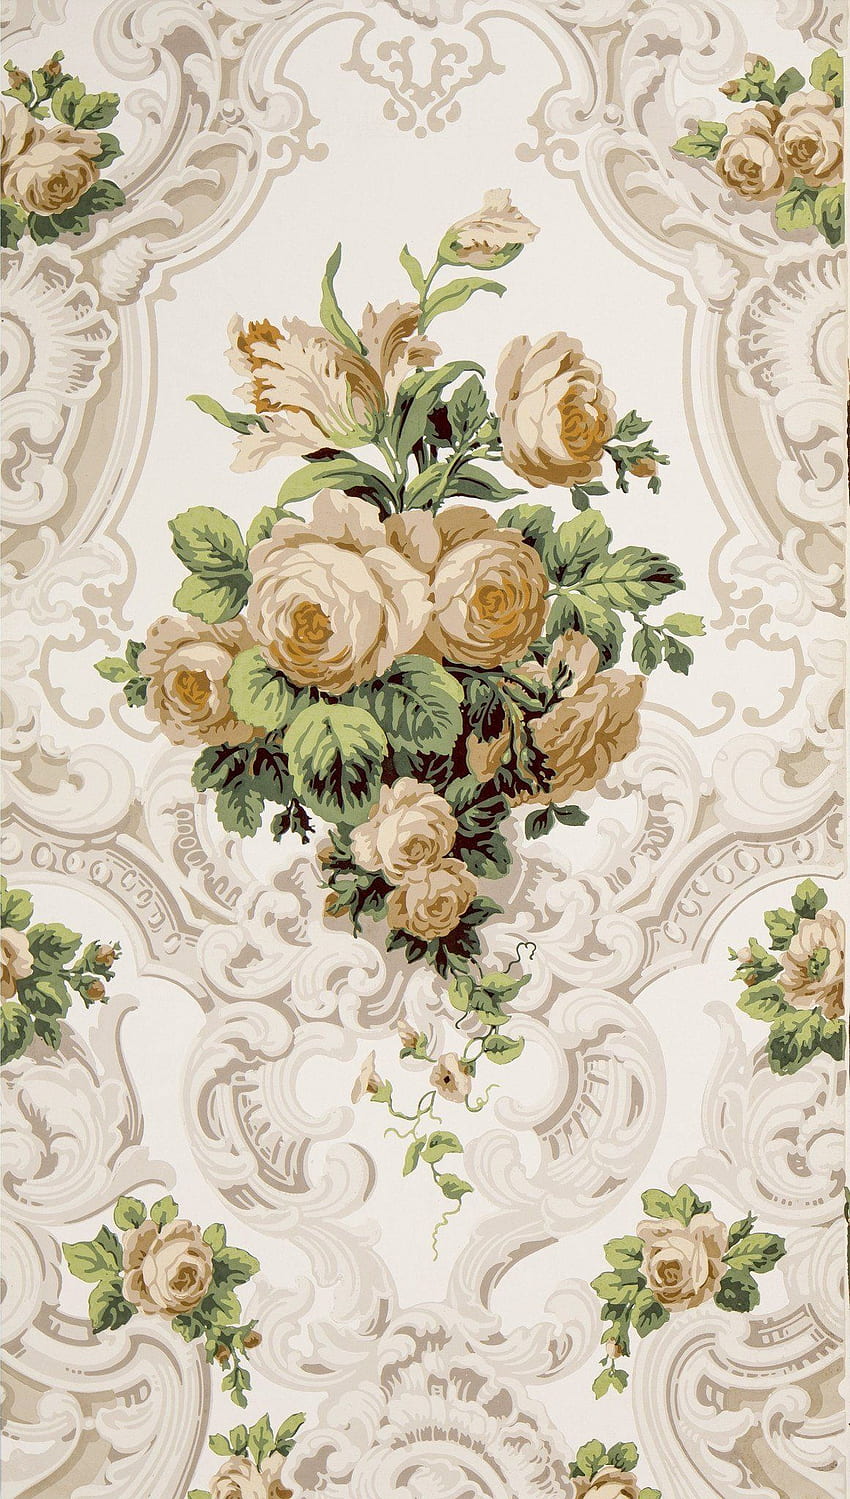 Large Rose Bouquets in Rococo Scrolls - Antique, Rococó HD phone wallpaper